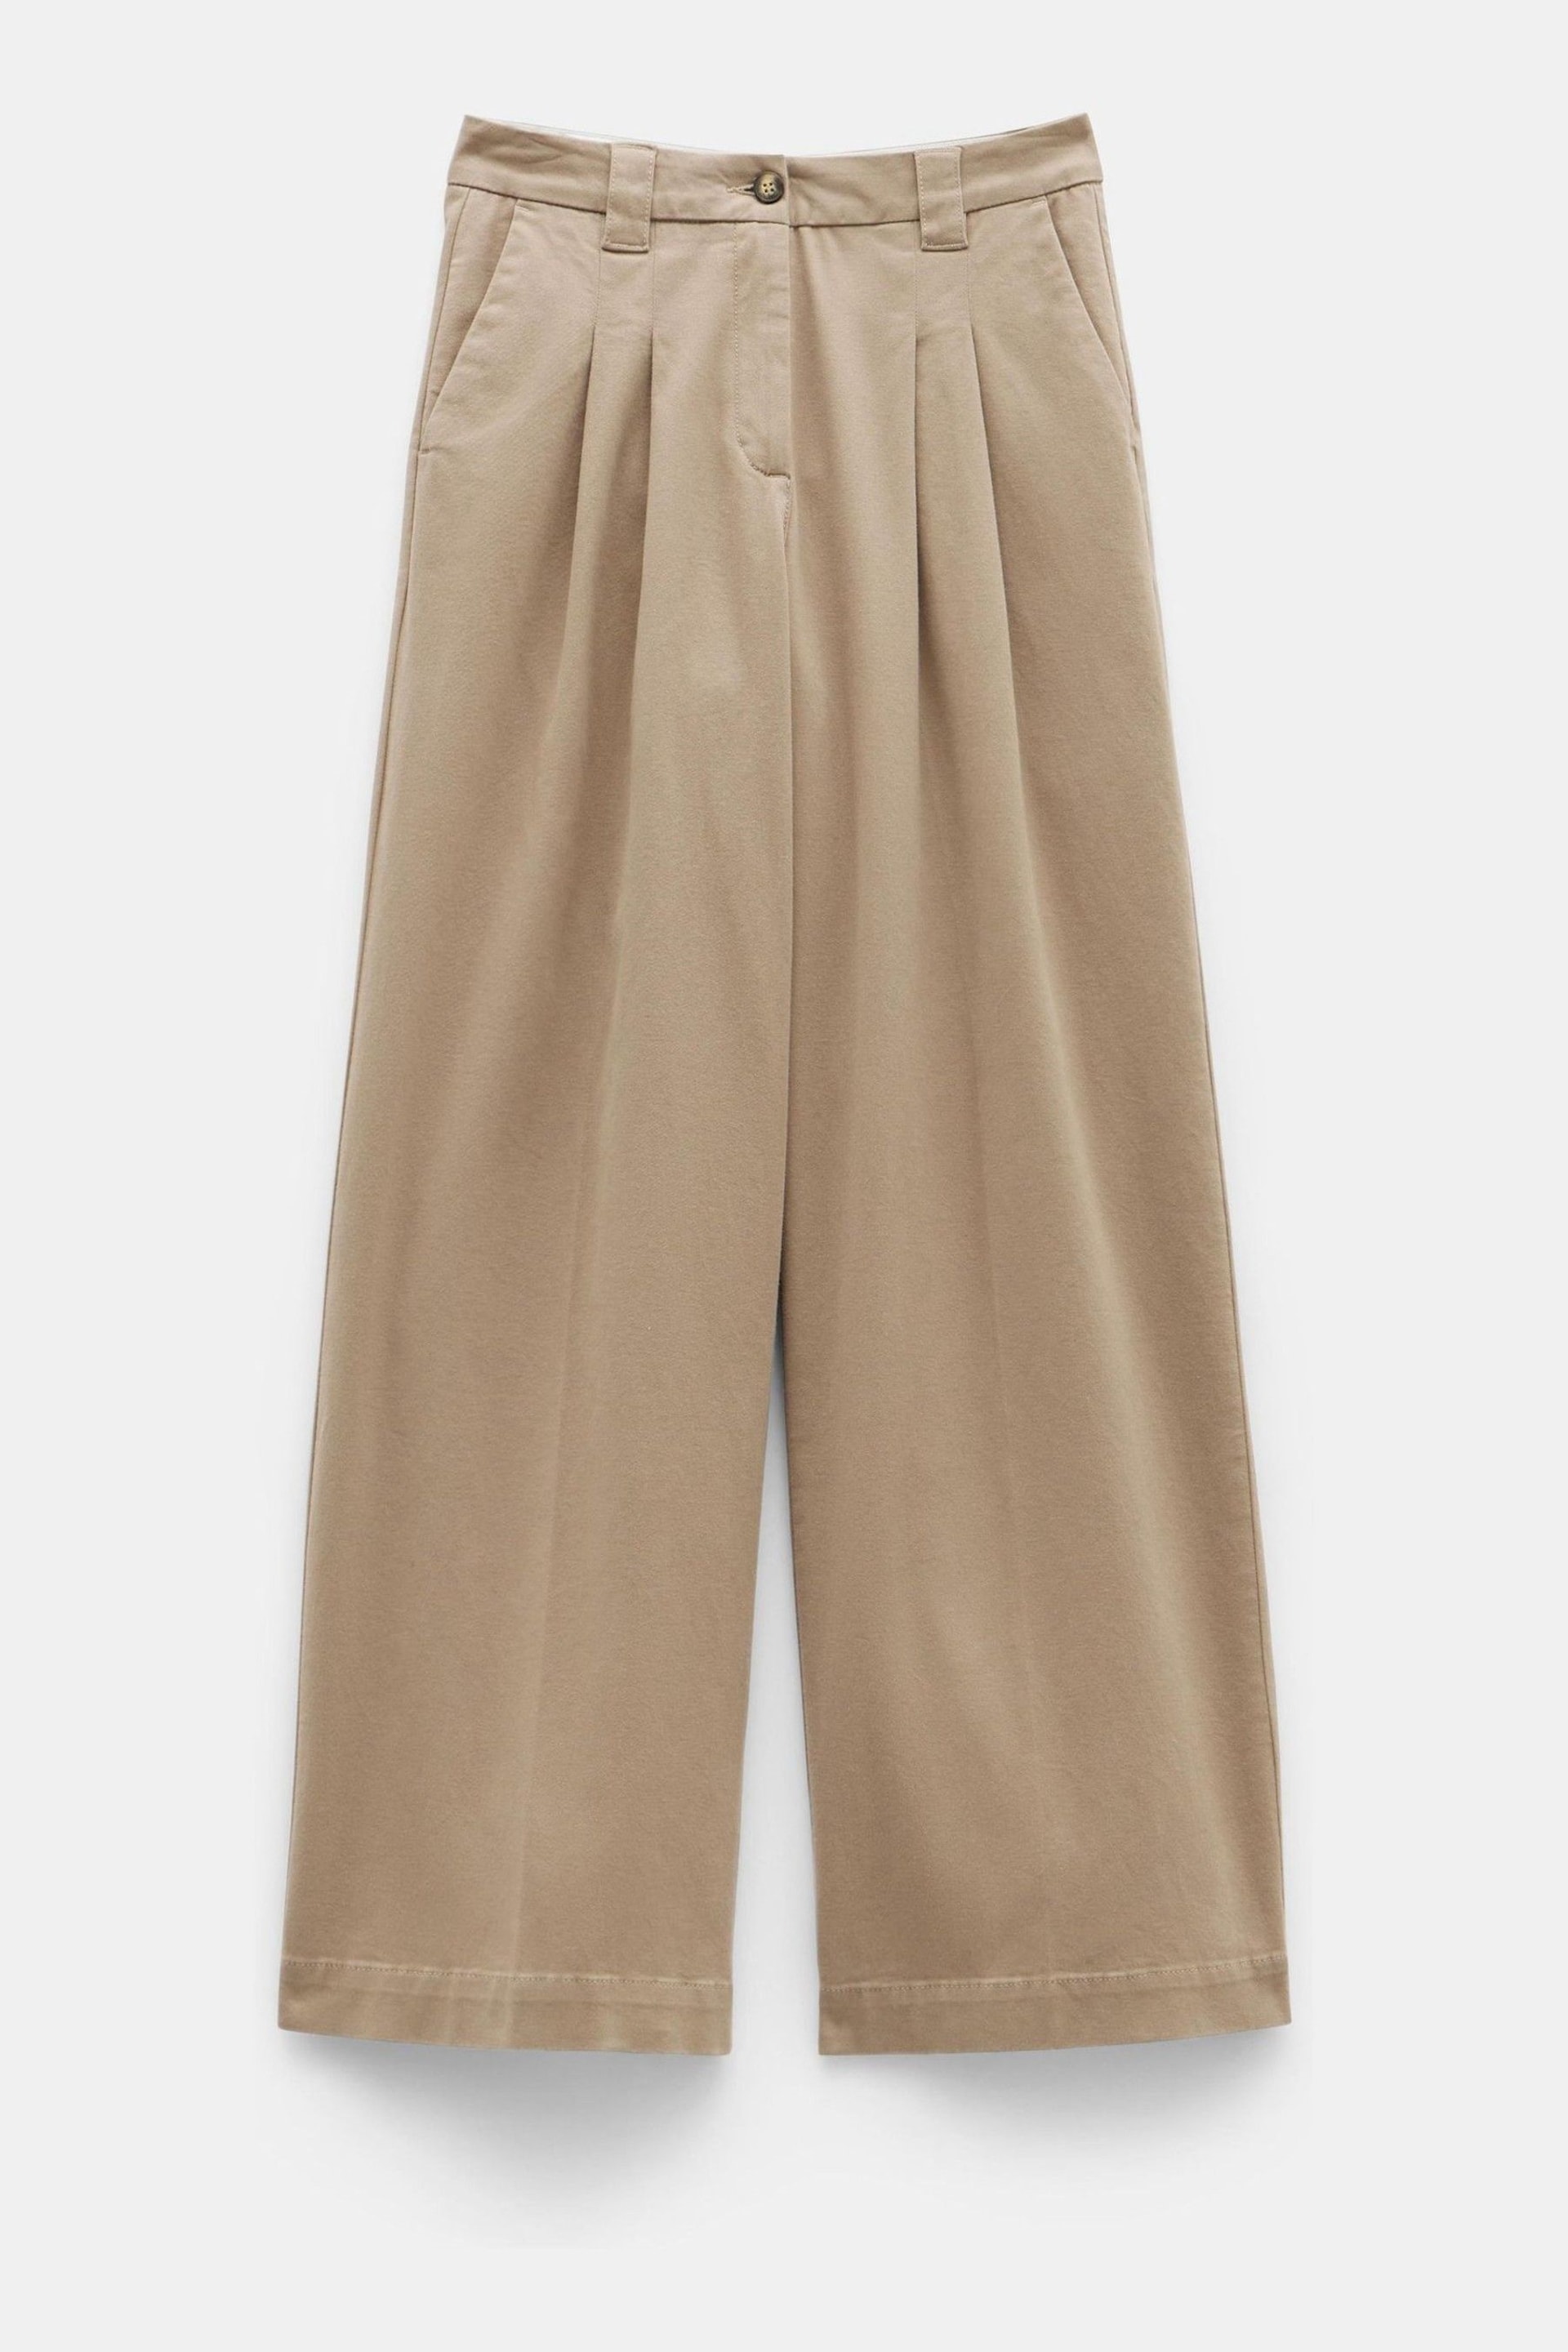 Hush Nude Ali Wide Chino Trousers - Image 5 of 5